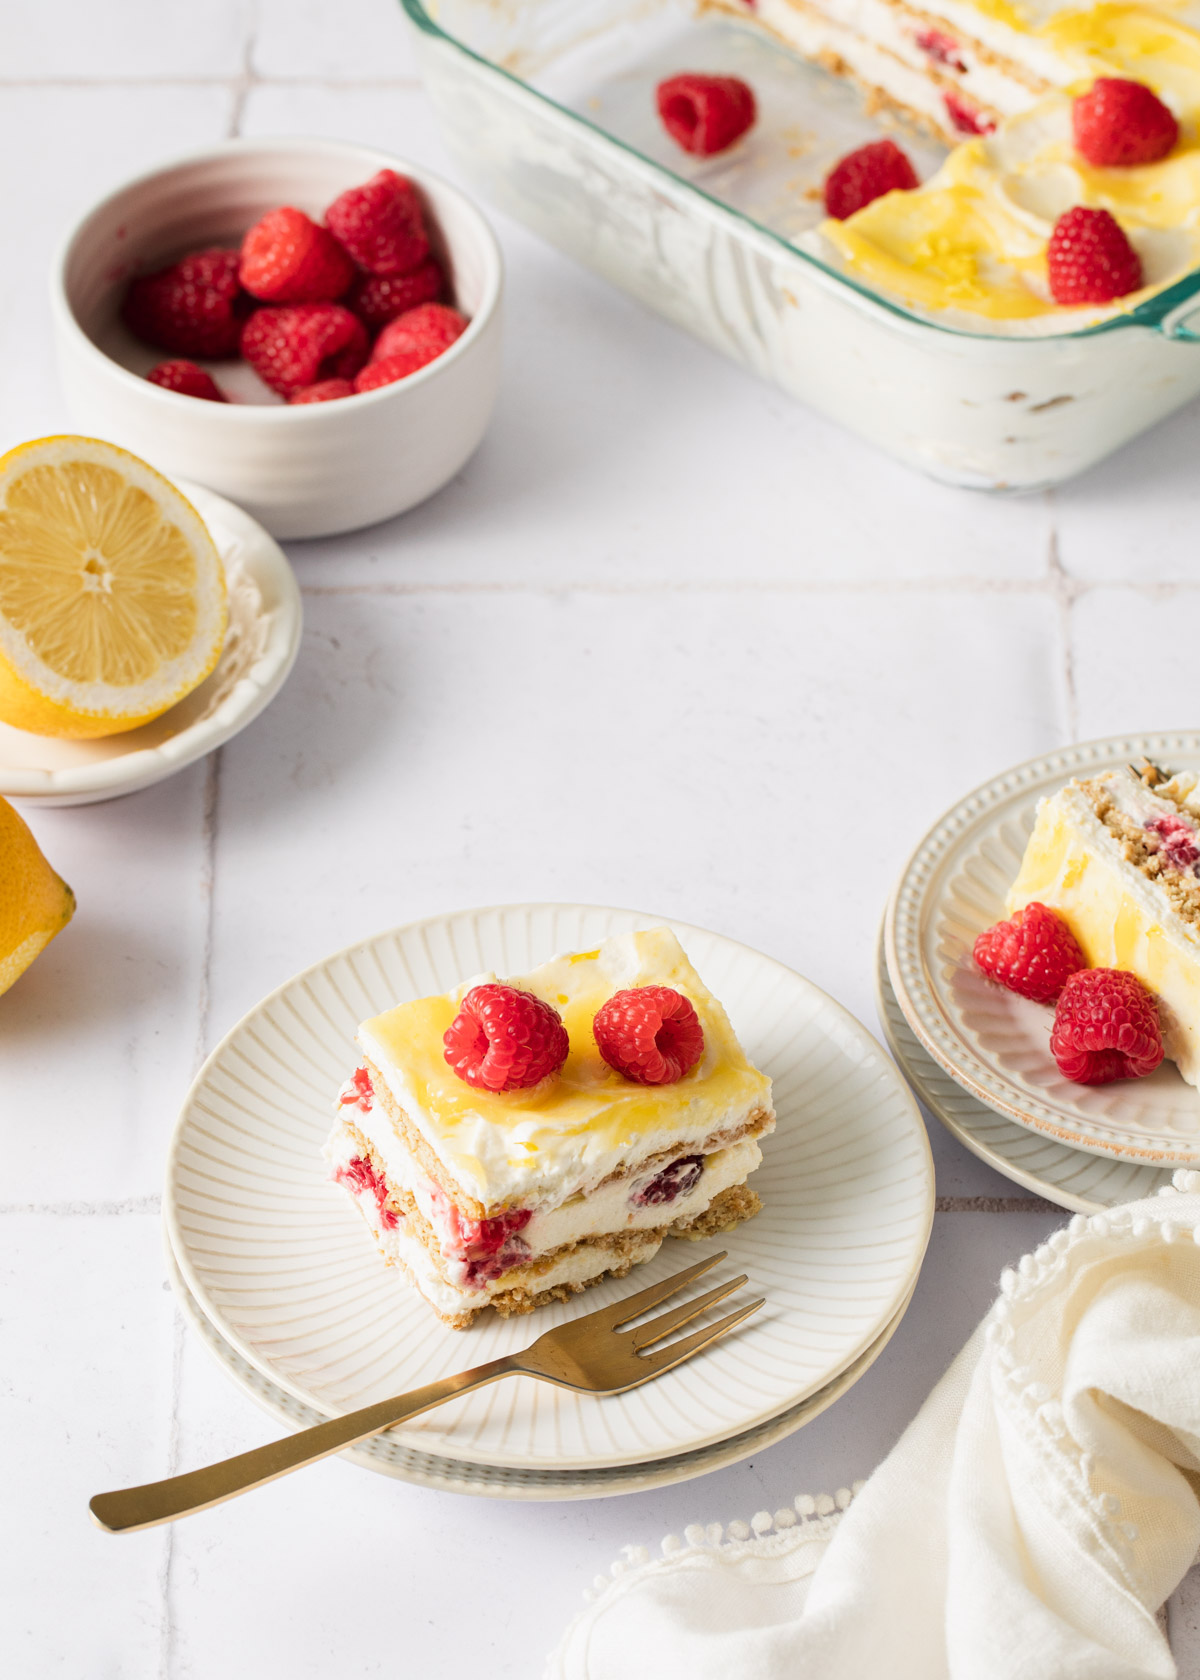 A lemon icebox cake with has been sliced and served with fresh raspberries on top